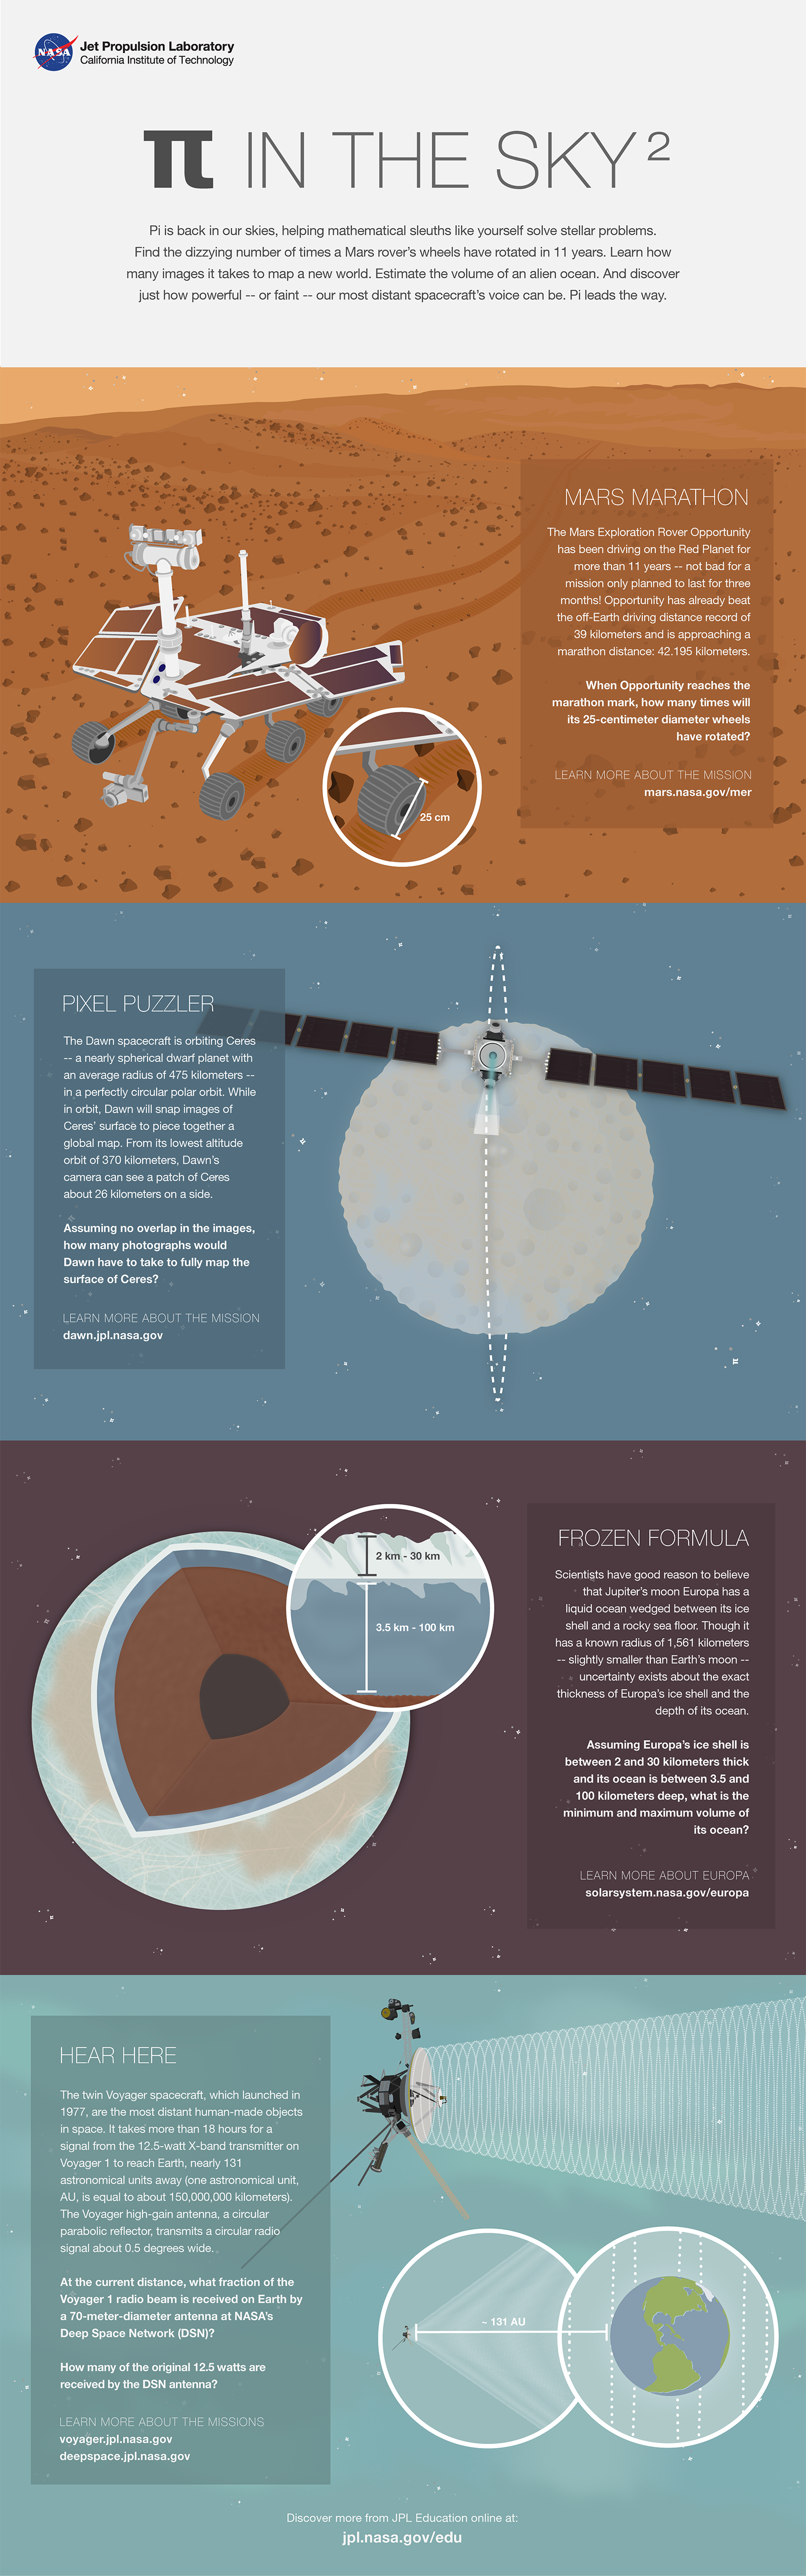 Pi in the Sky 2 Infographic